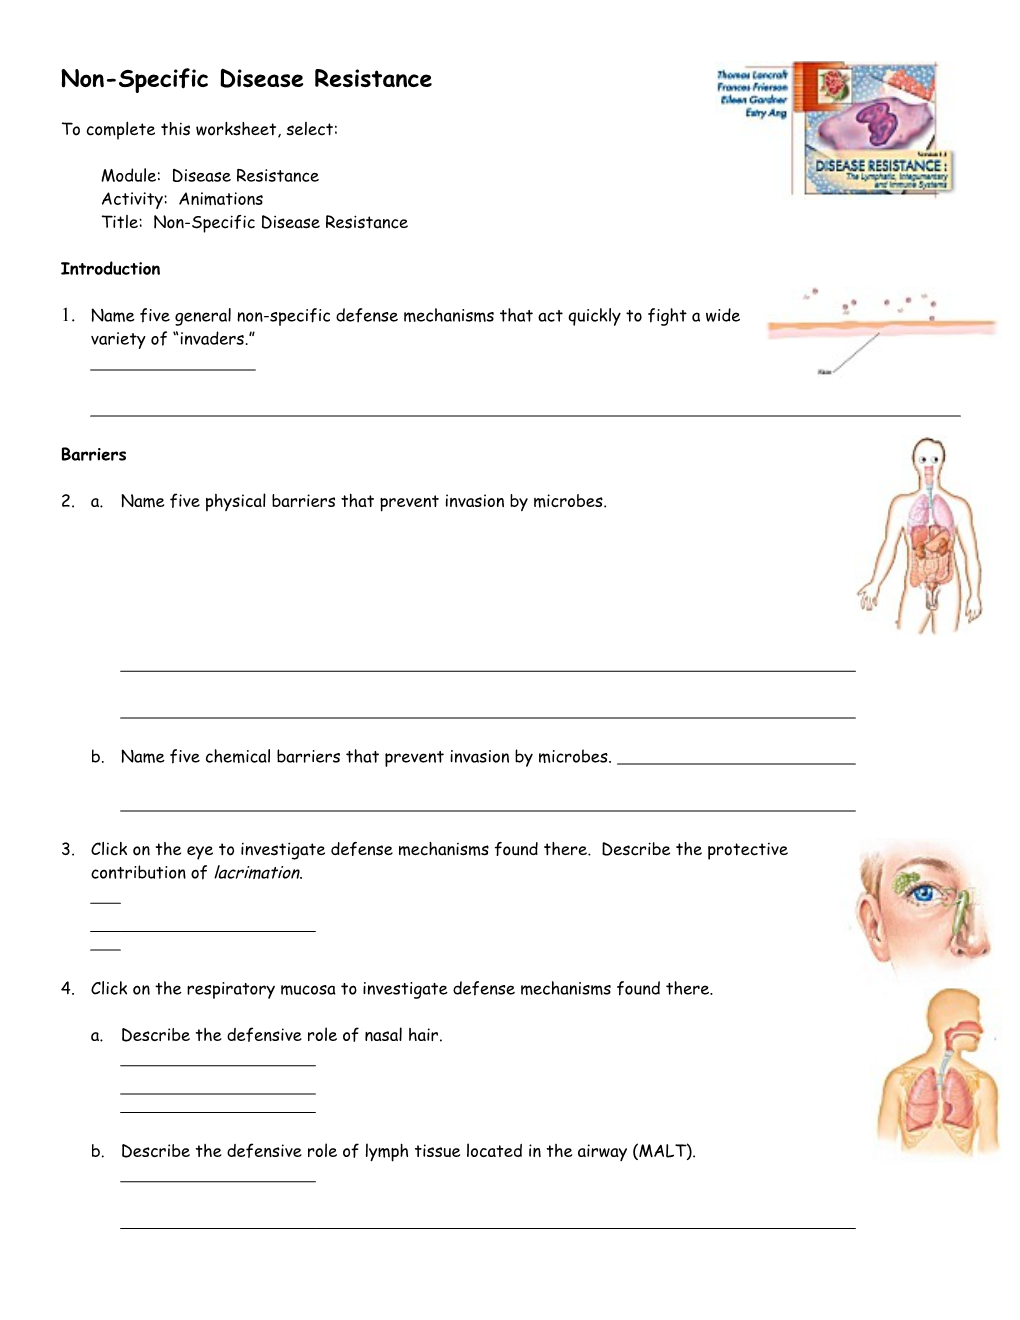 Endocrine System: Overview s2